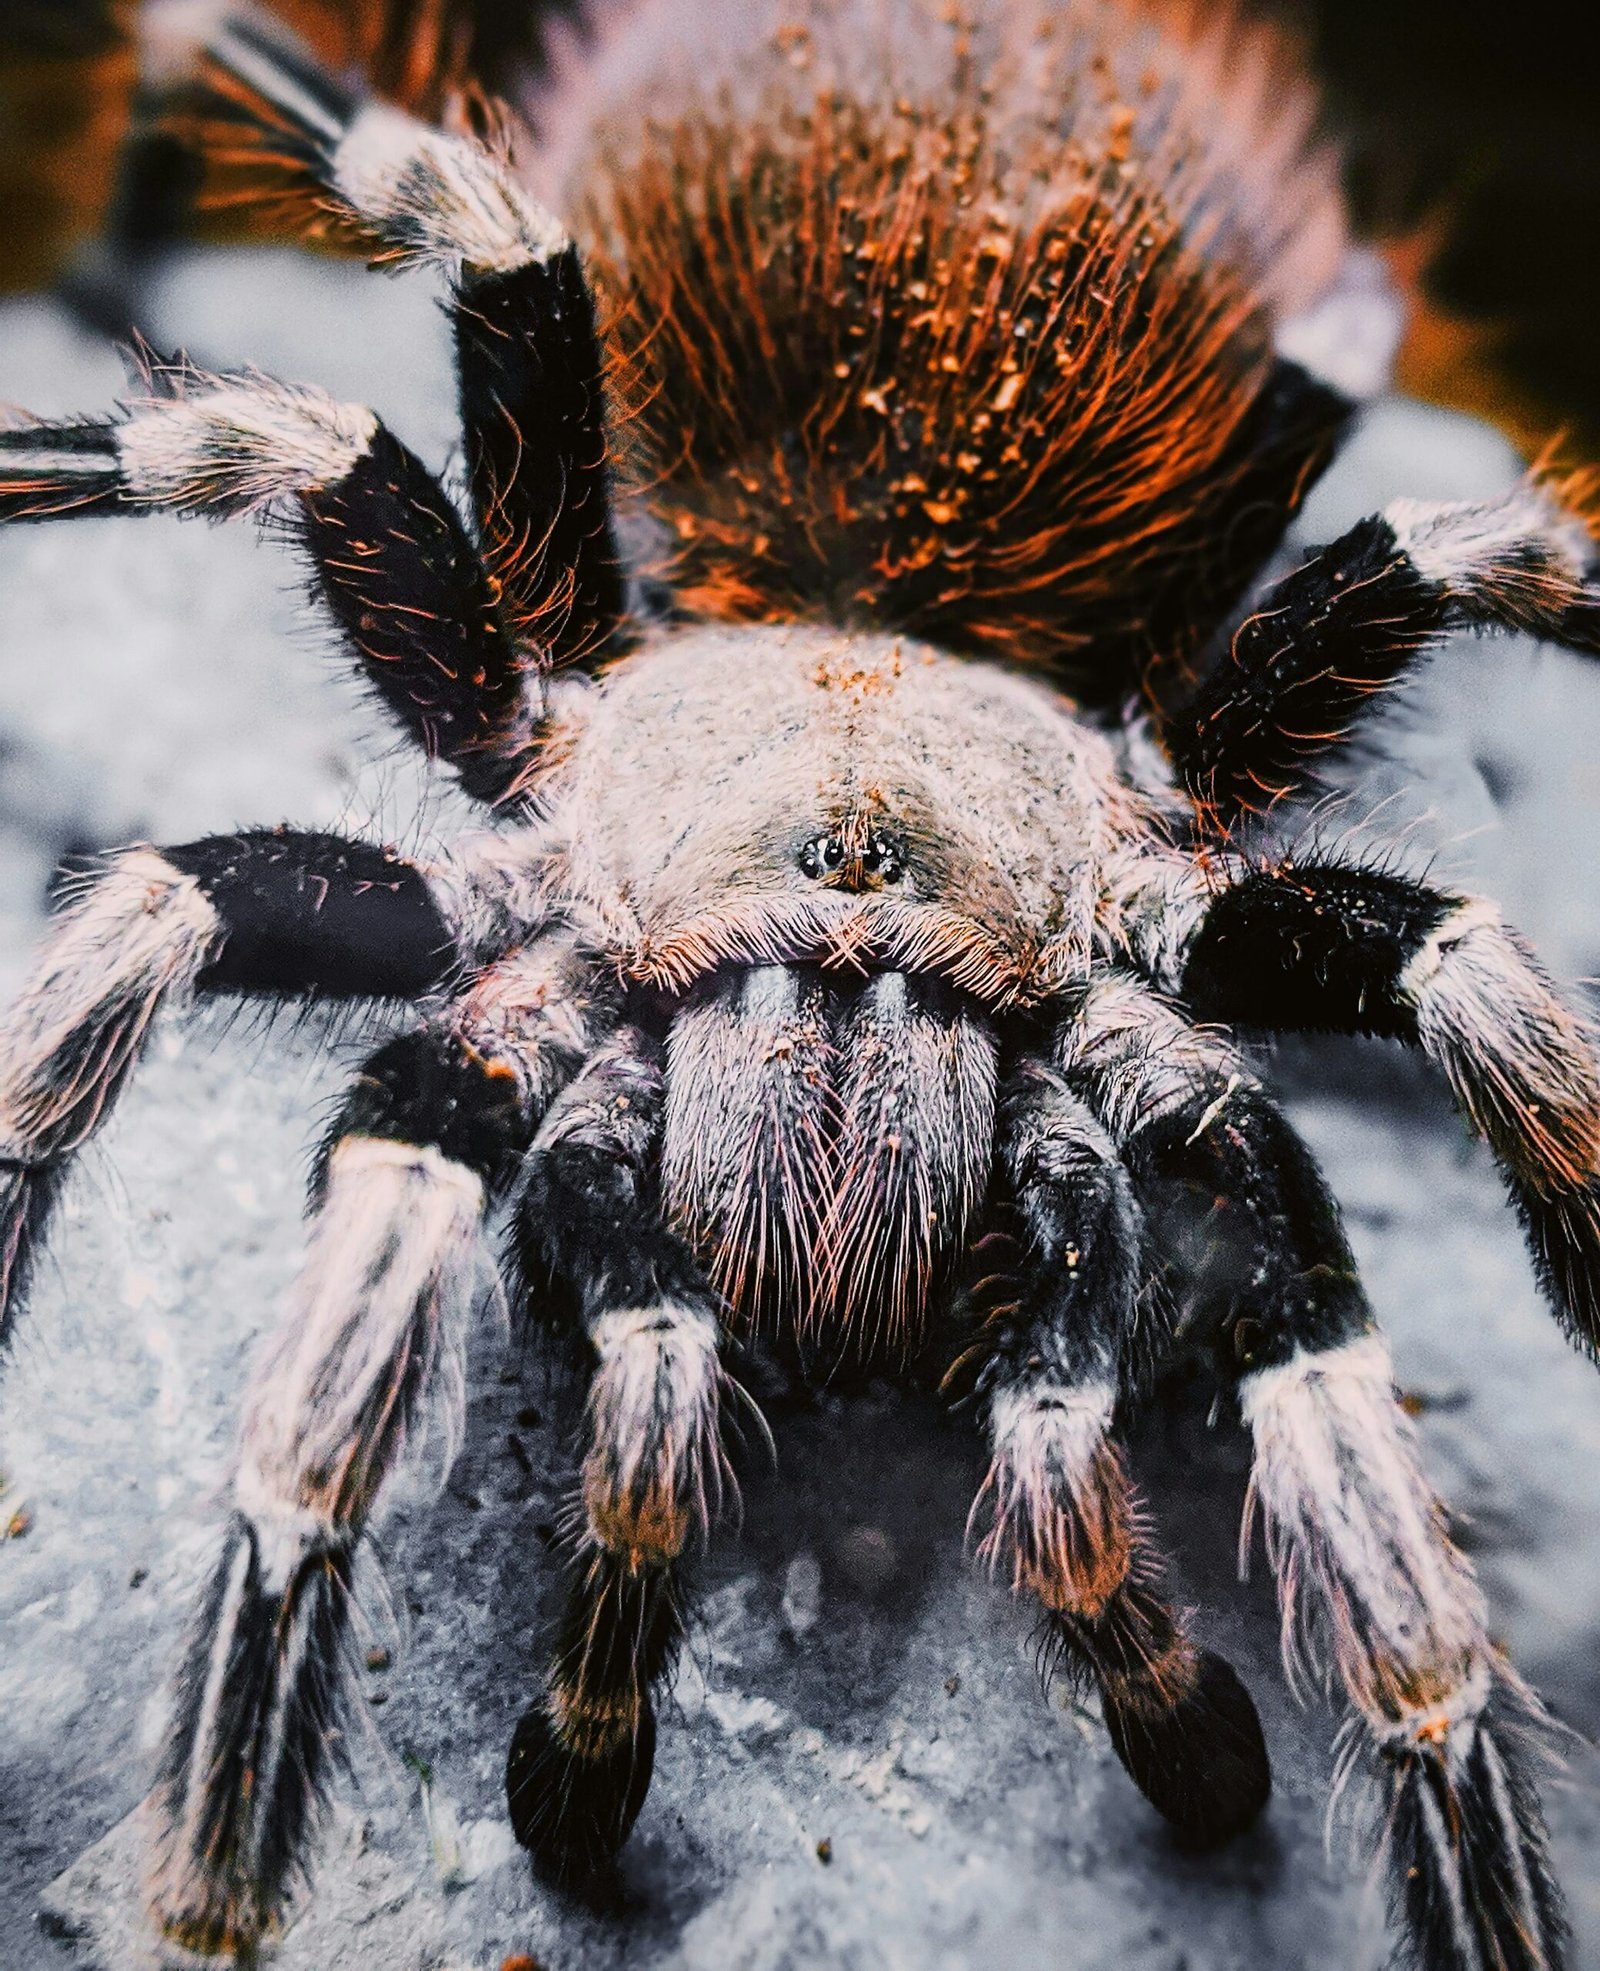 What Should I Do If My Tarantula Is Not Interested In Mating?